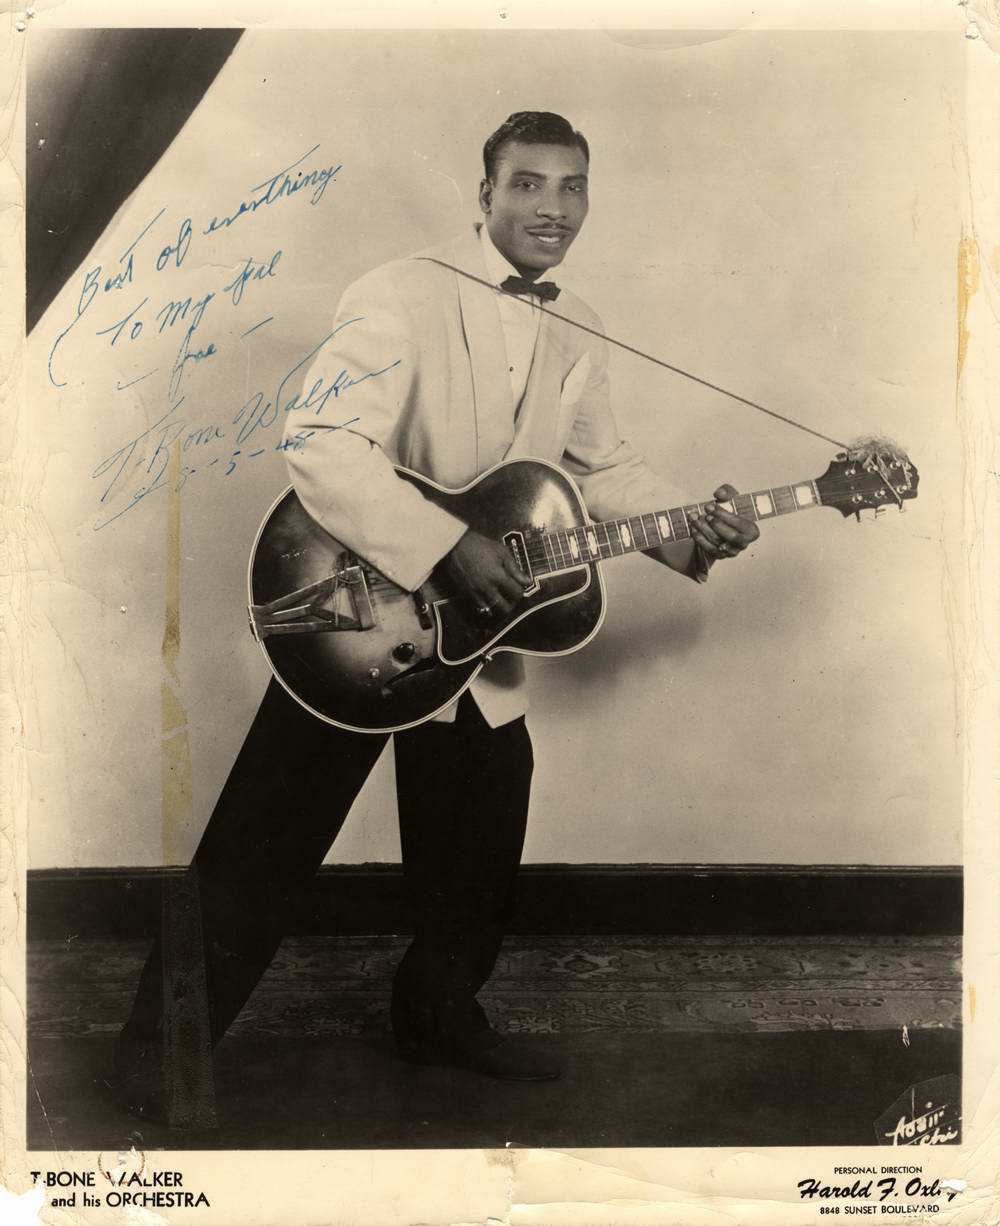 Happy birthday to T-Bone Walker and Billy Vera - Thanks for the cool music! 